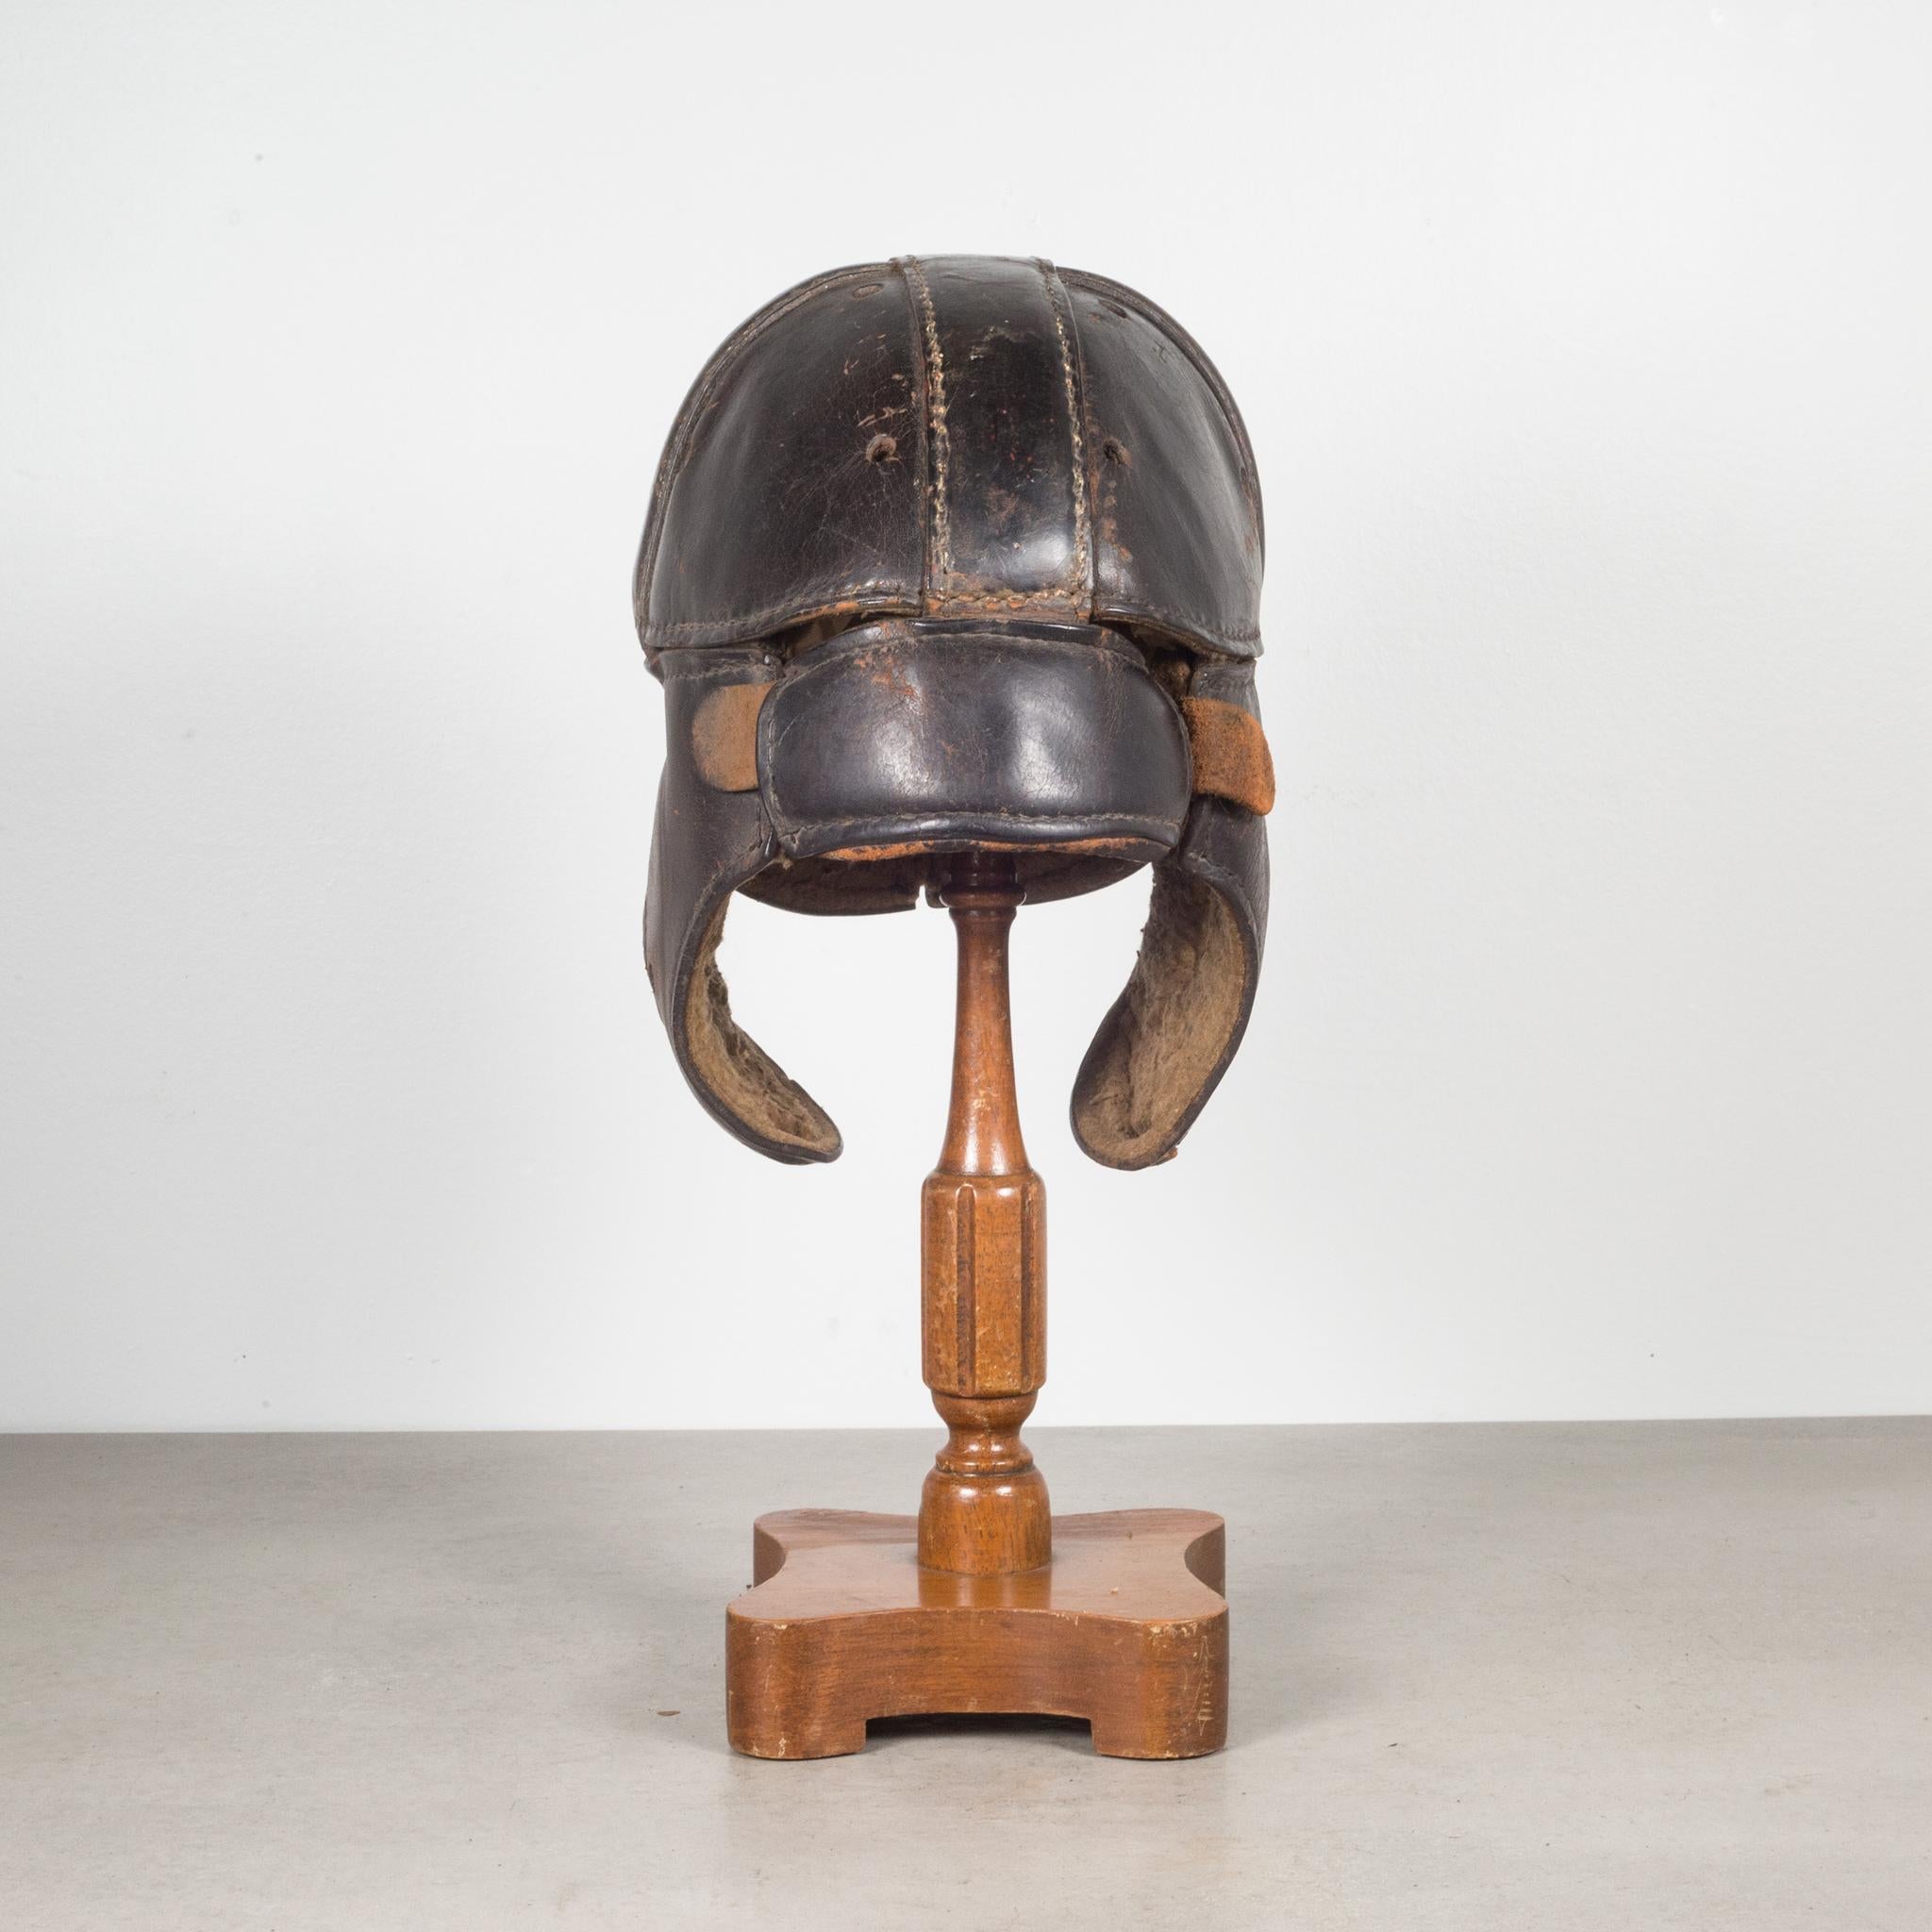 About

An original antique leather football helmet on wooden hat stand. The piece has retained its original finish and is in good condition with appropriate patina for its age.

Creator: Unknown.
Date of manufacture: c.1900-1920.
Materials and